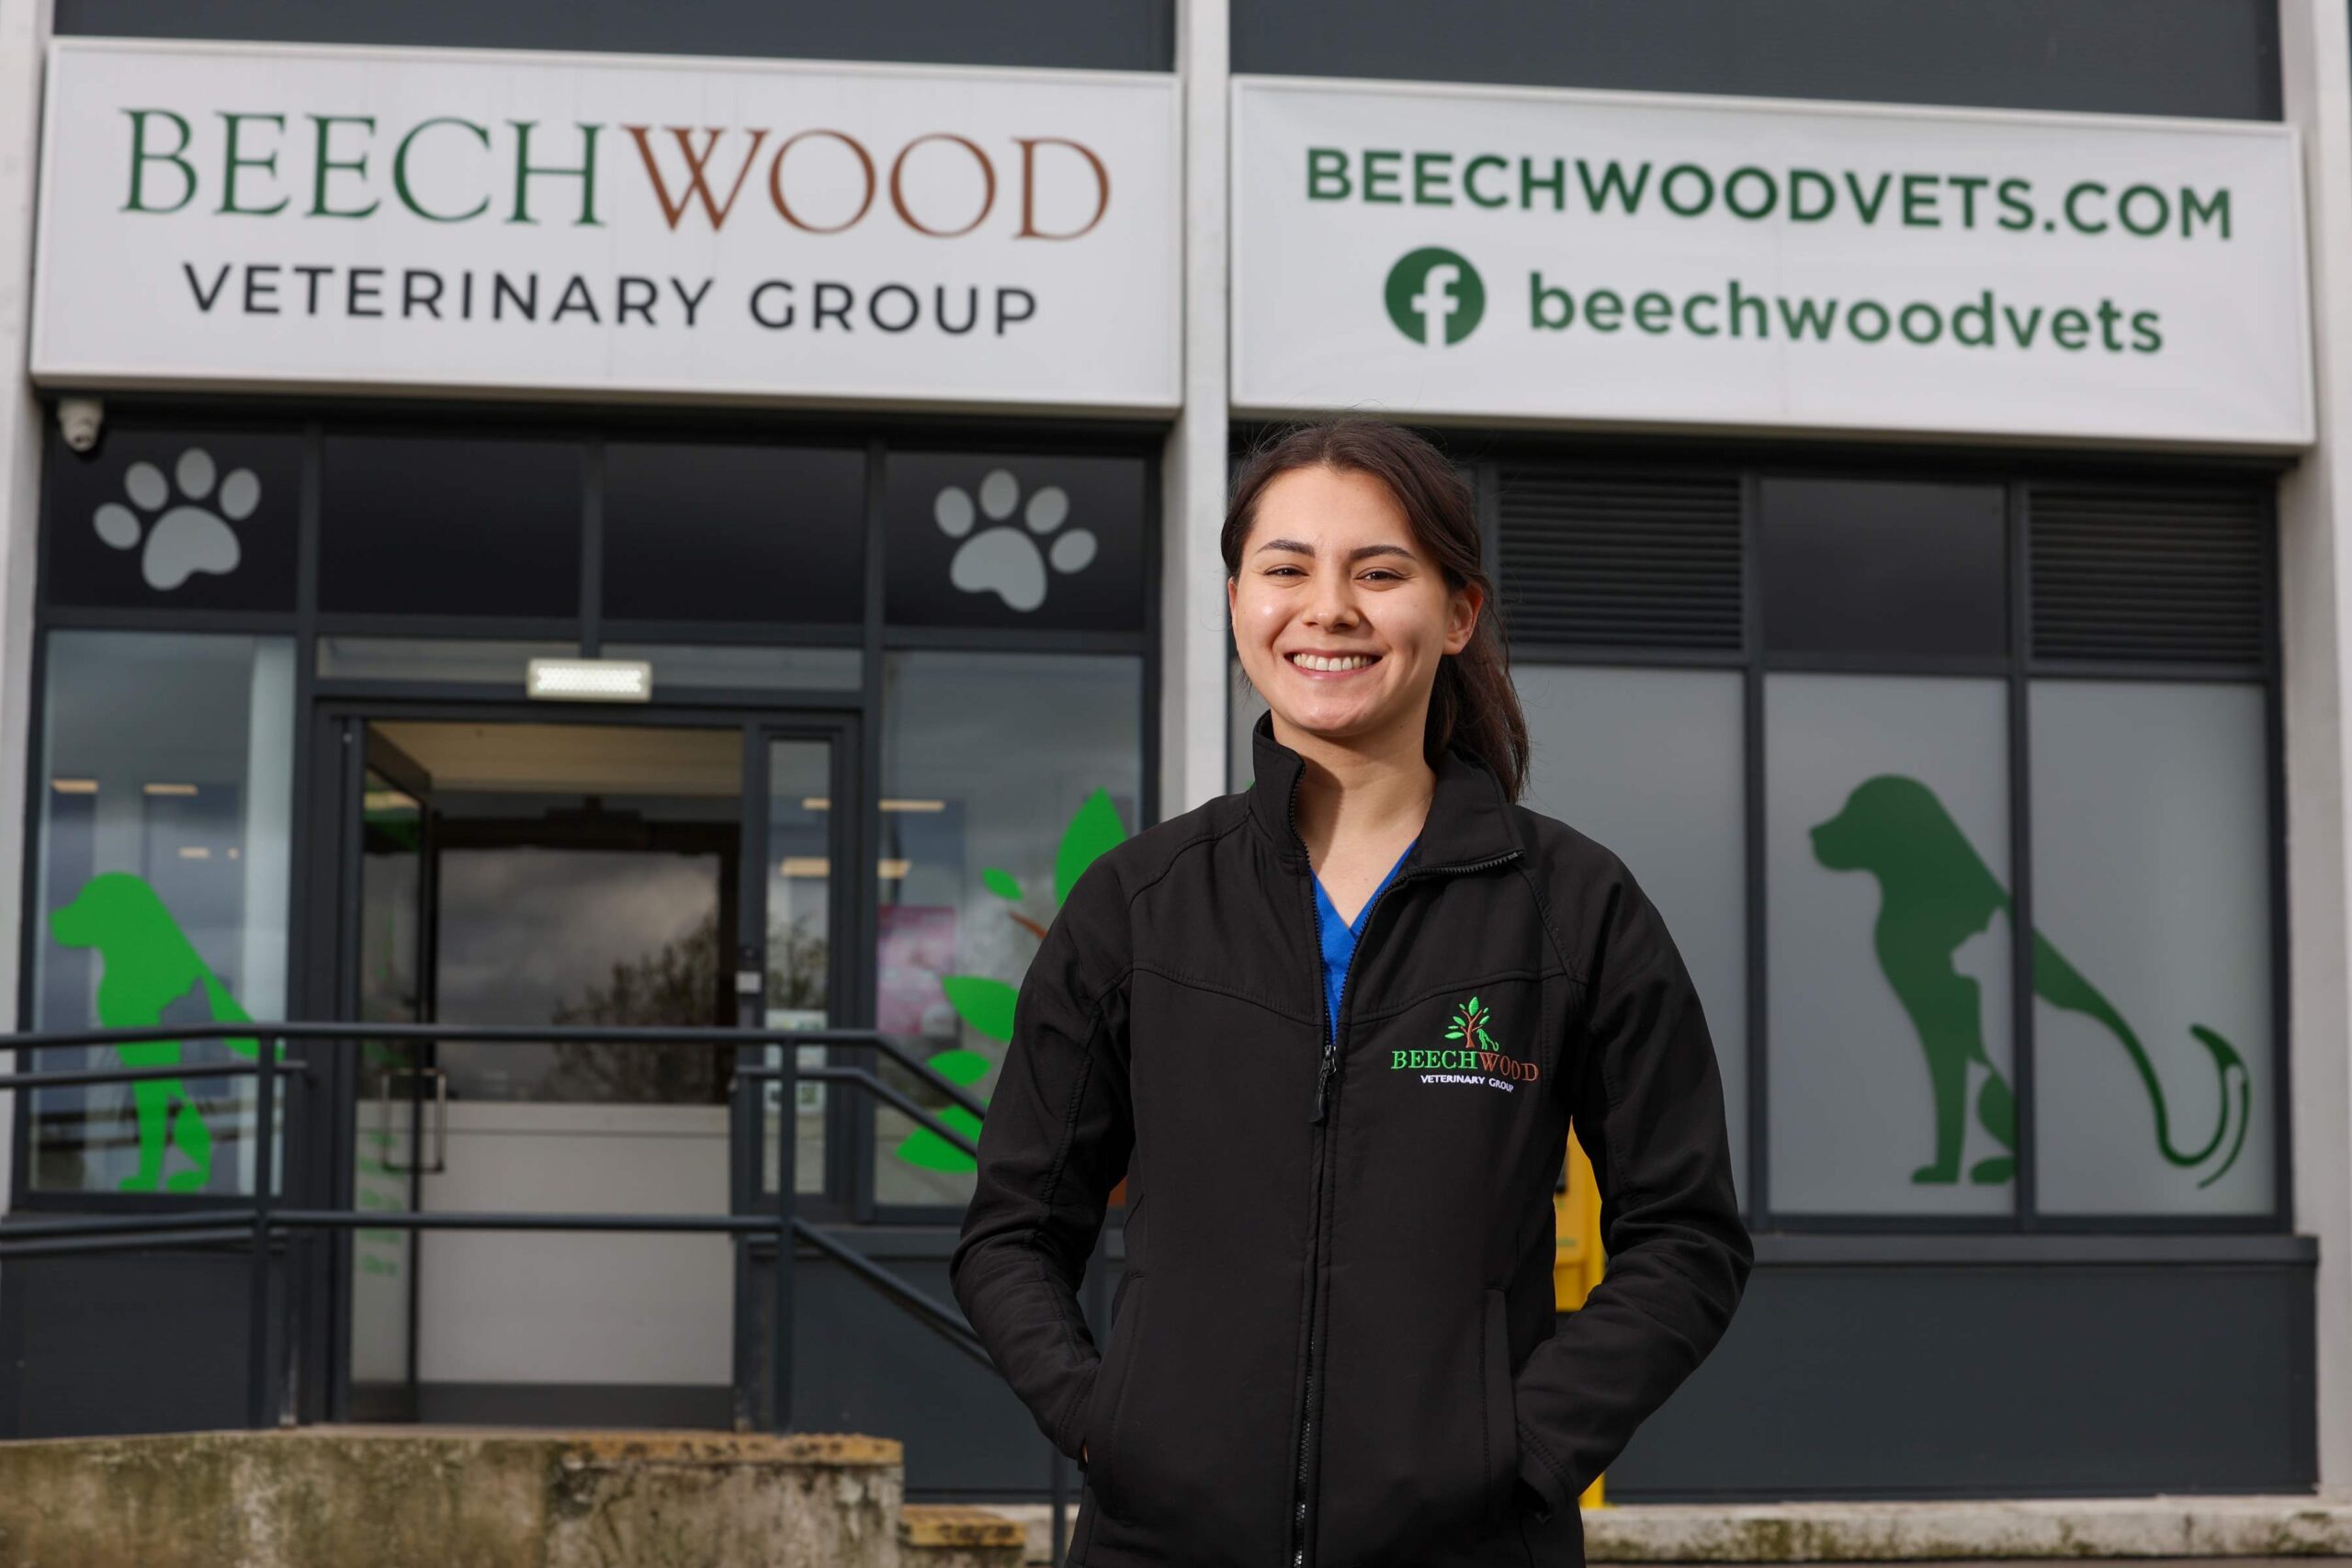 Alice pictured outside entrance to Beechwood Vets.